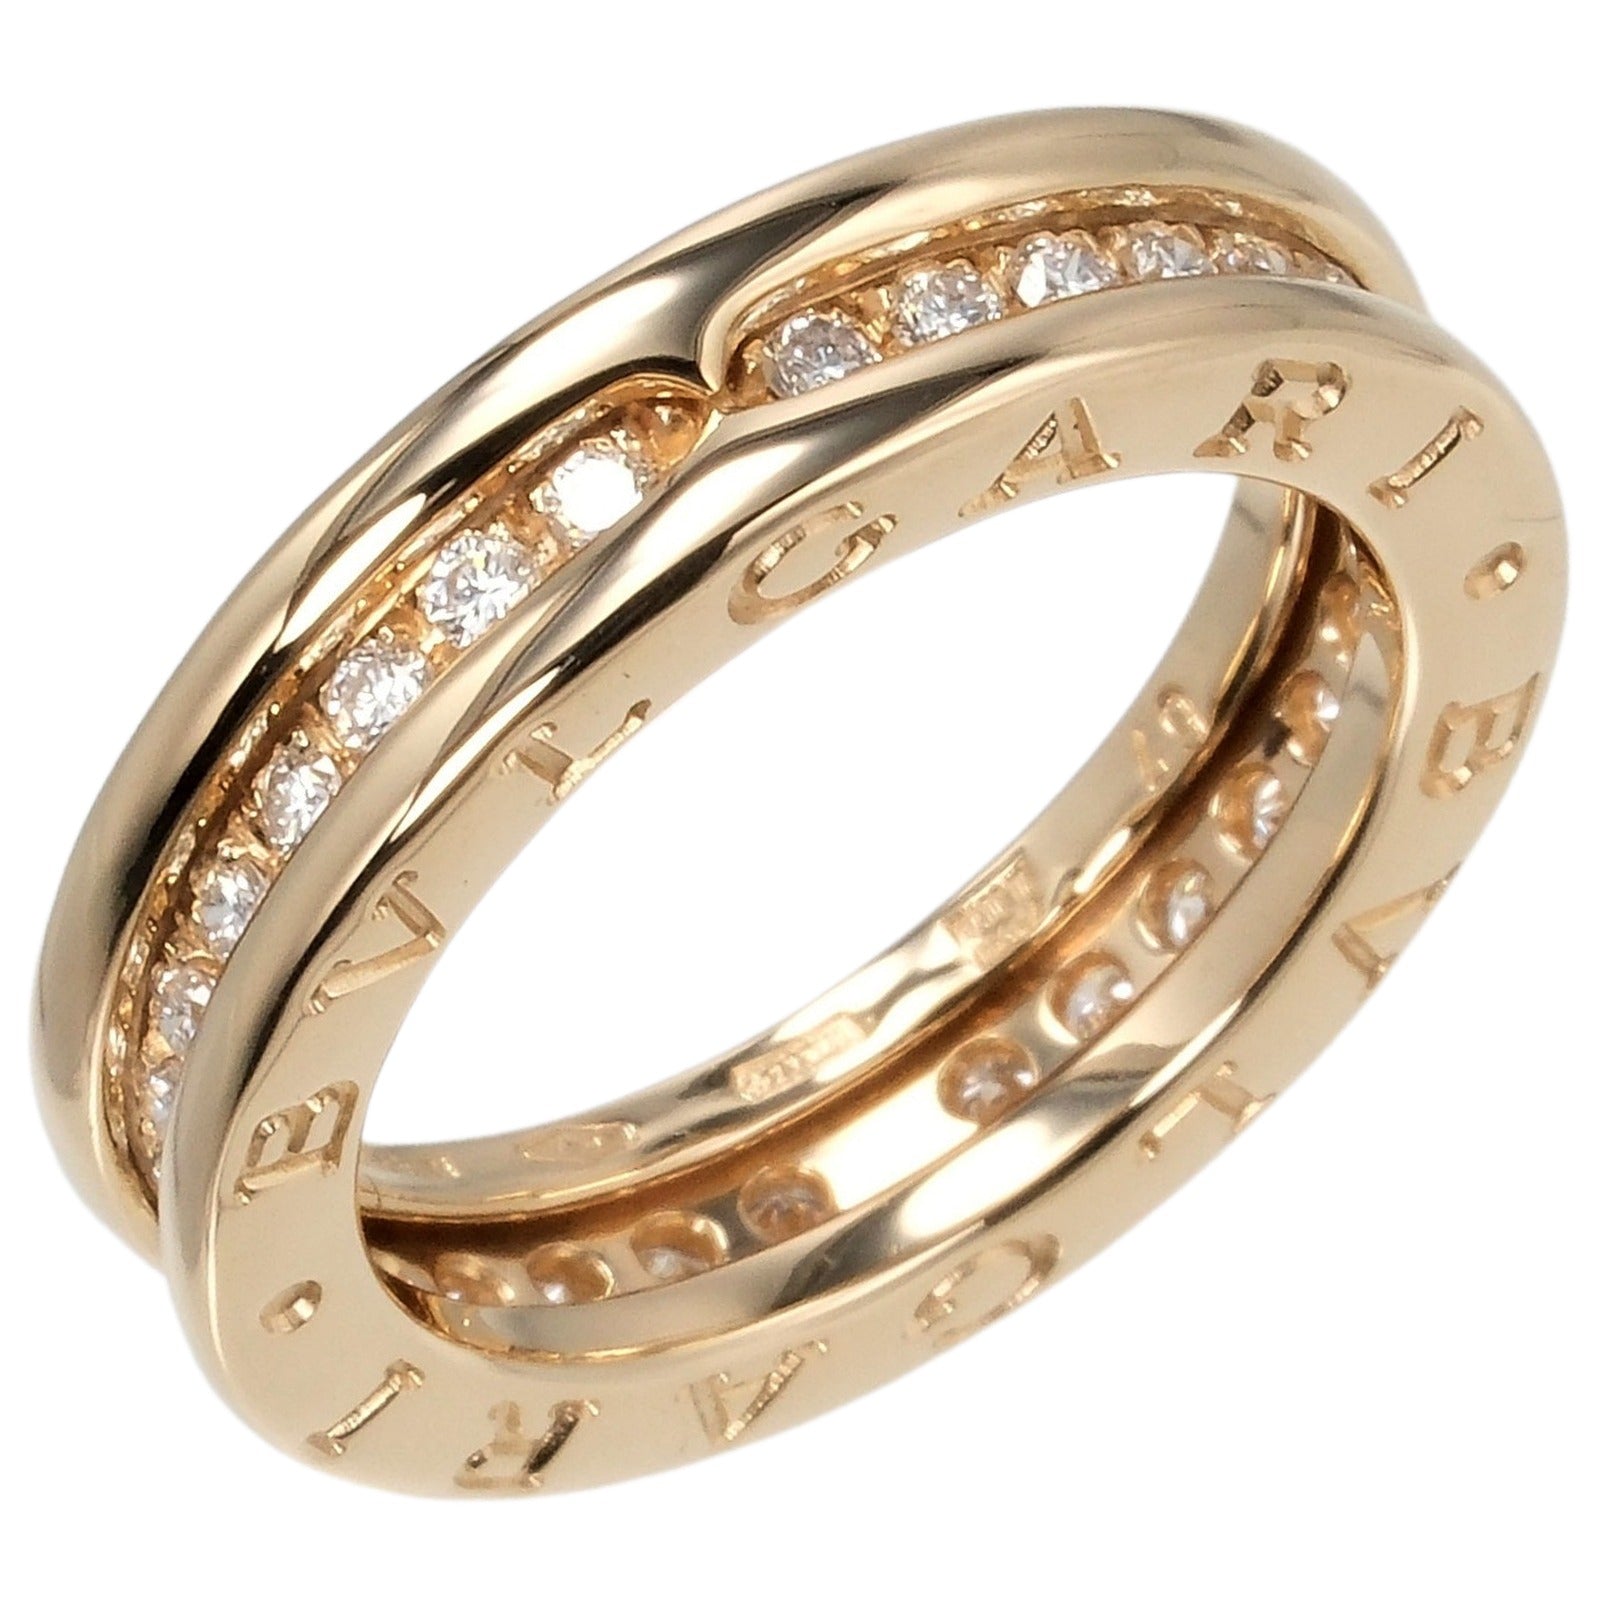 [LuxUness]  BVLGARI B.ZERO1 XS Single Band Ring, Size 8.5, 6.8g, K18 Yellow Gold with Full Diamonds Metal Ring B.ZERO1 in Excellent condition